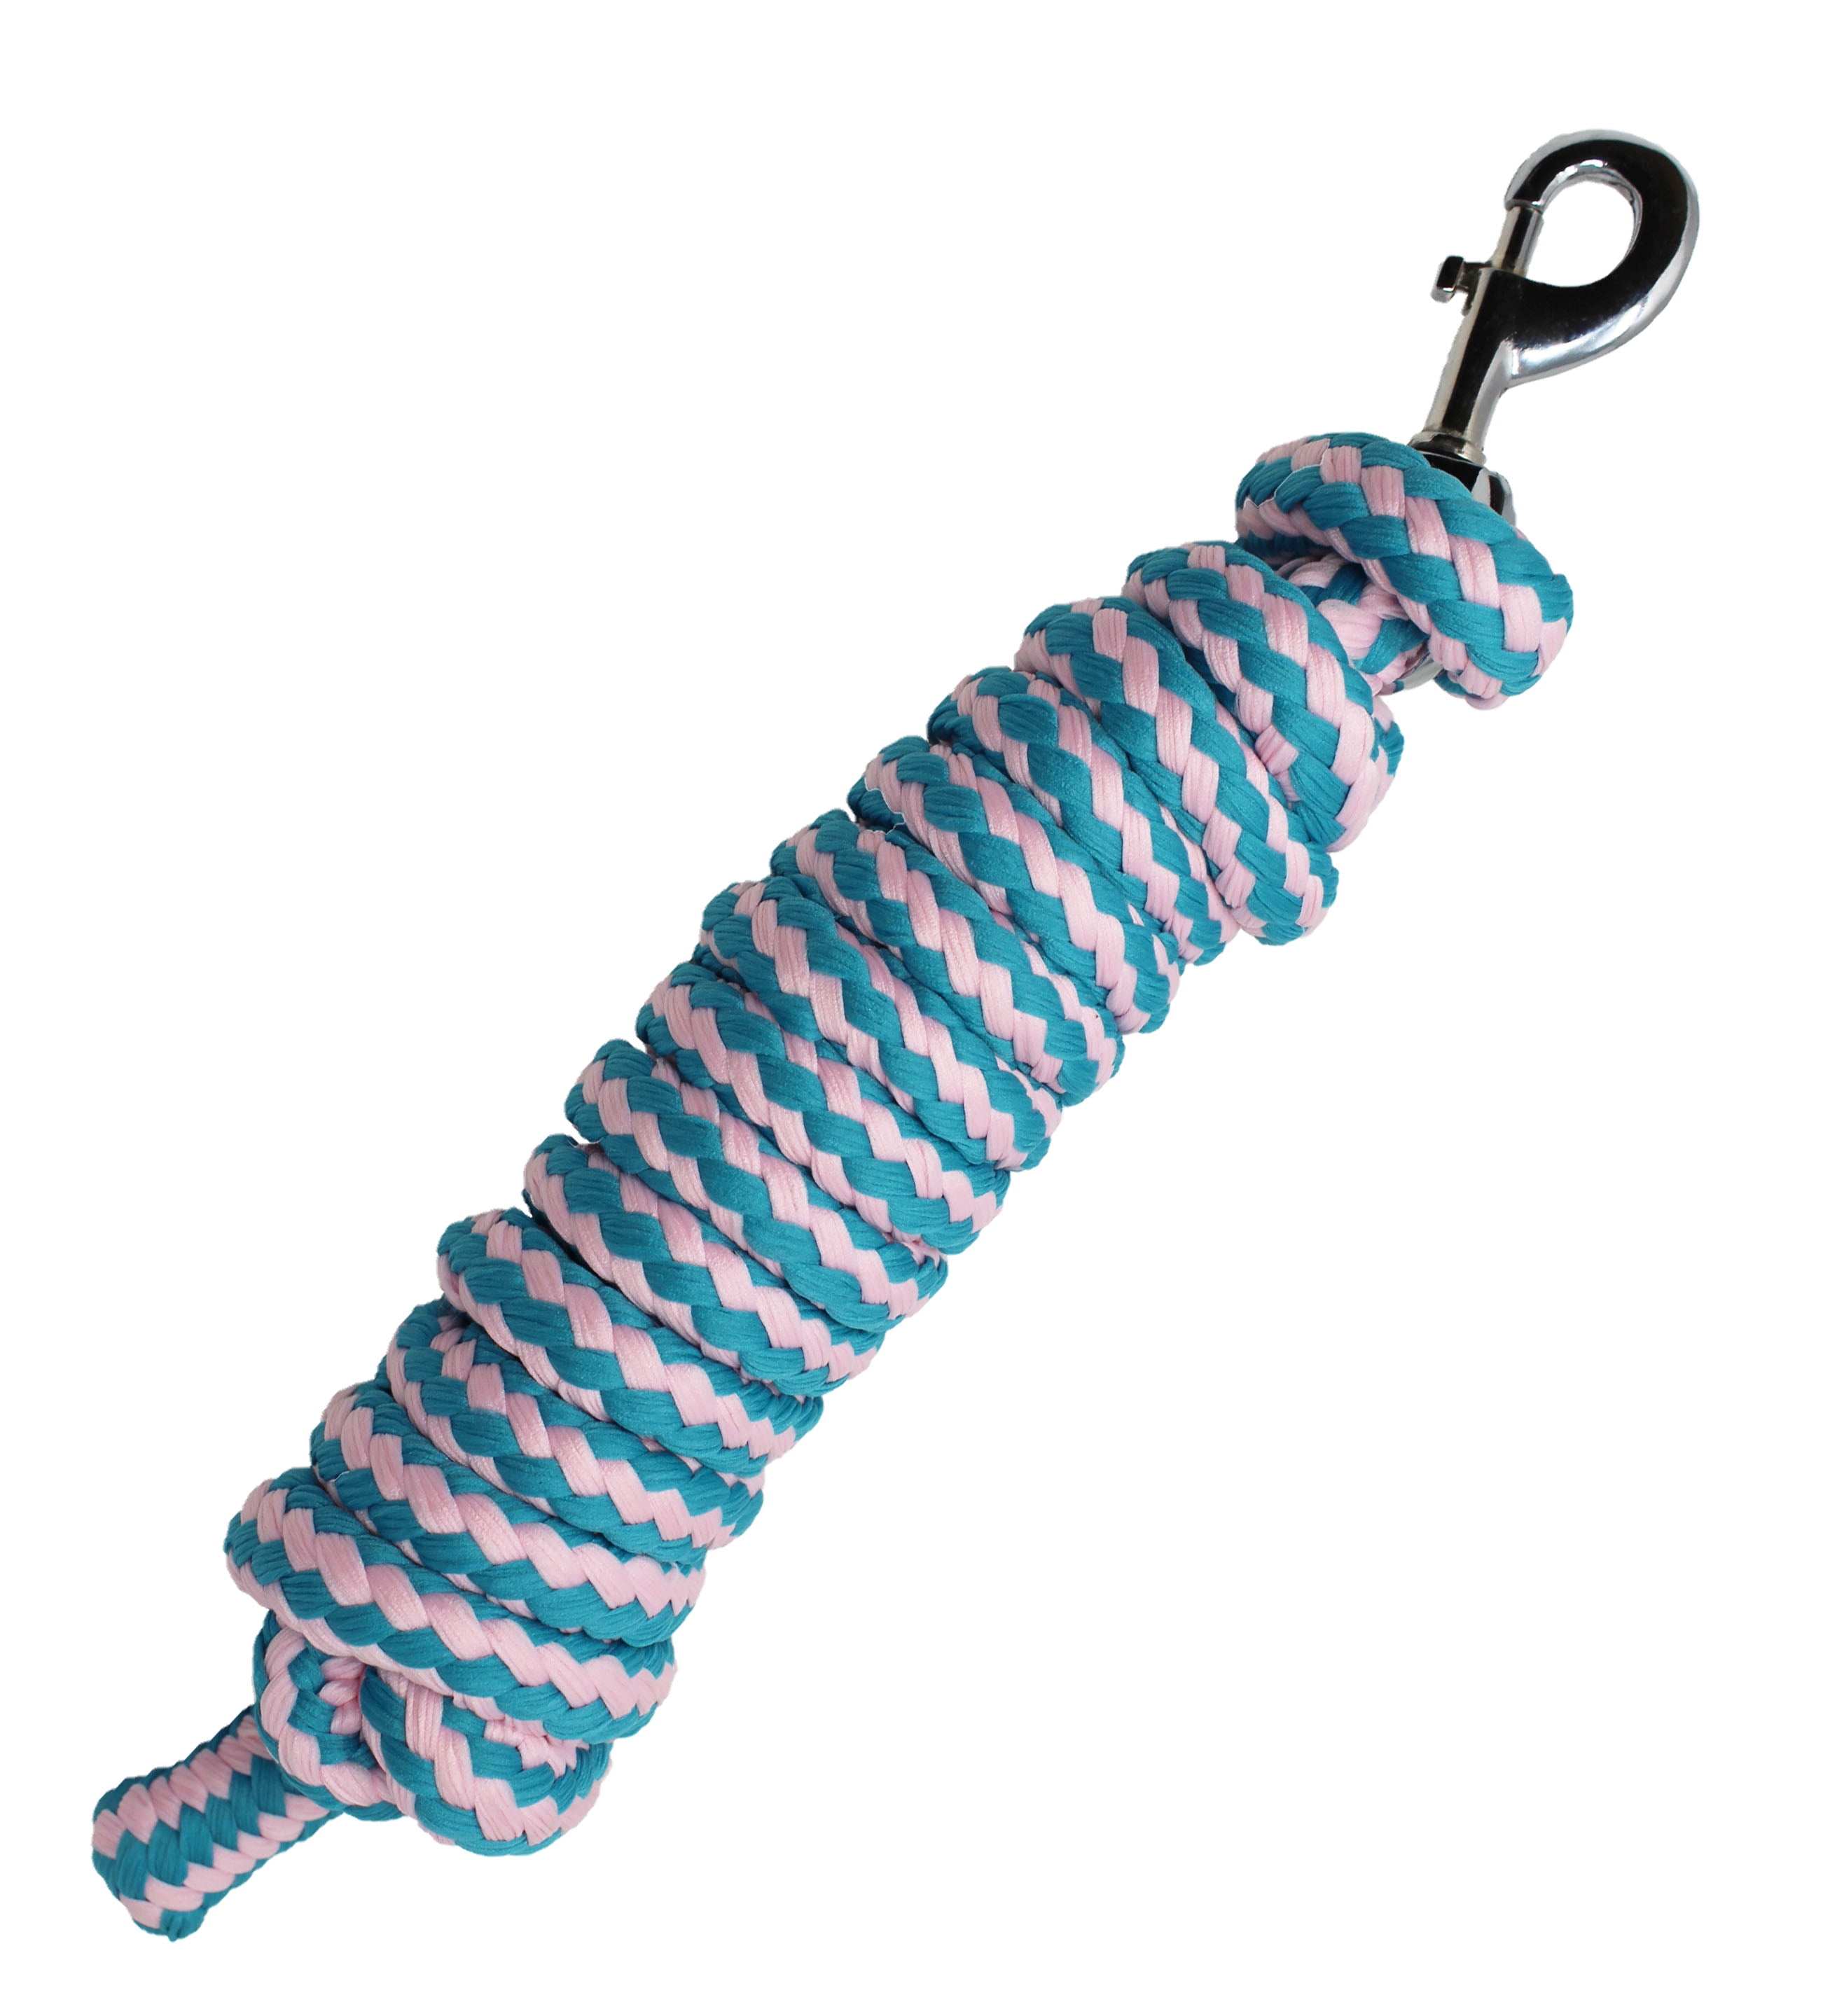 Teal - Large Tough-1 Miniature Poly Rope Tied Halter